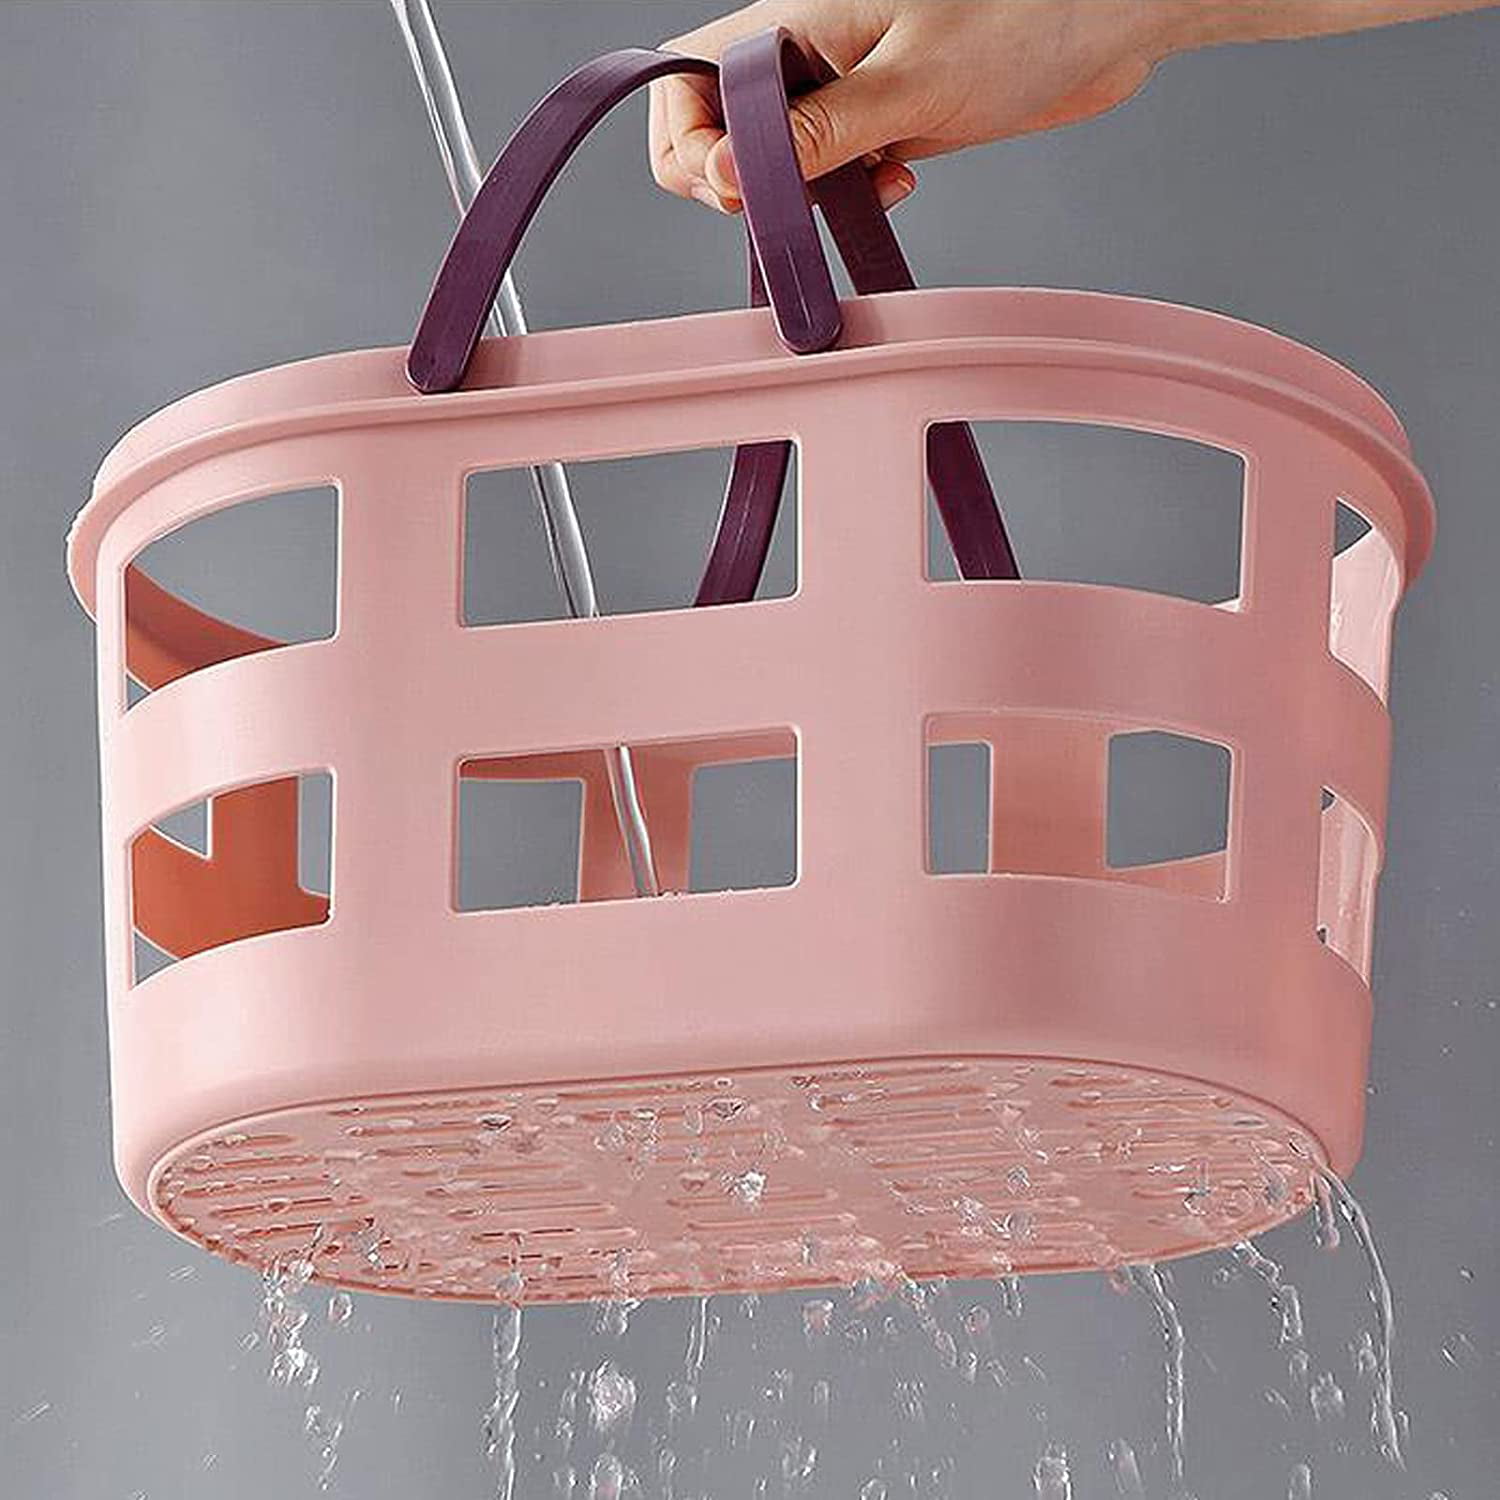 clberni Hanging Shower Caddy Plastic Hanging Shower Caddy Basket Portable Kitchen Organizer Storage Basket with Hook for Home Grey, Size: 9 x 5.1 x 5.5, Gray